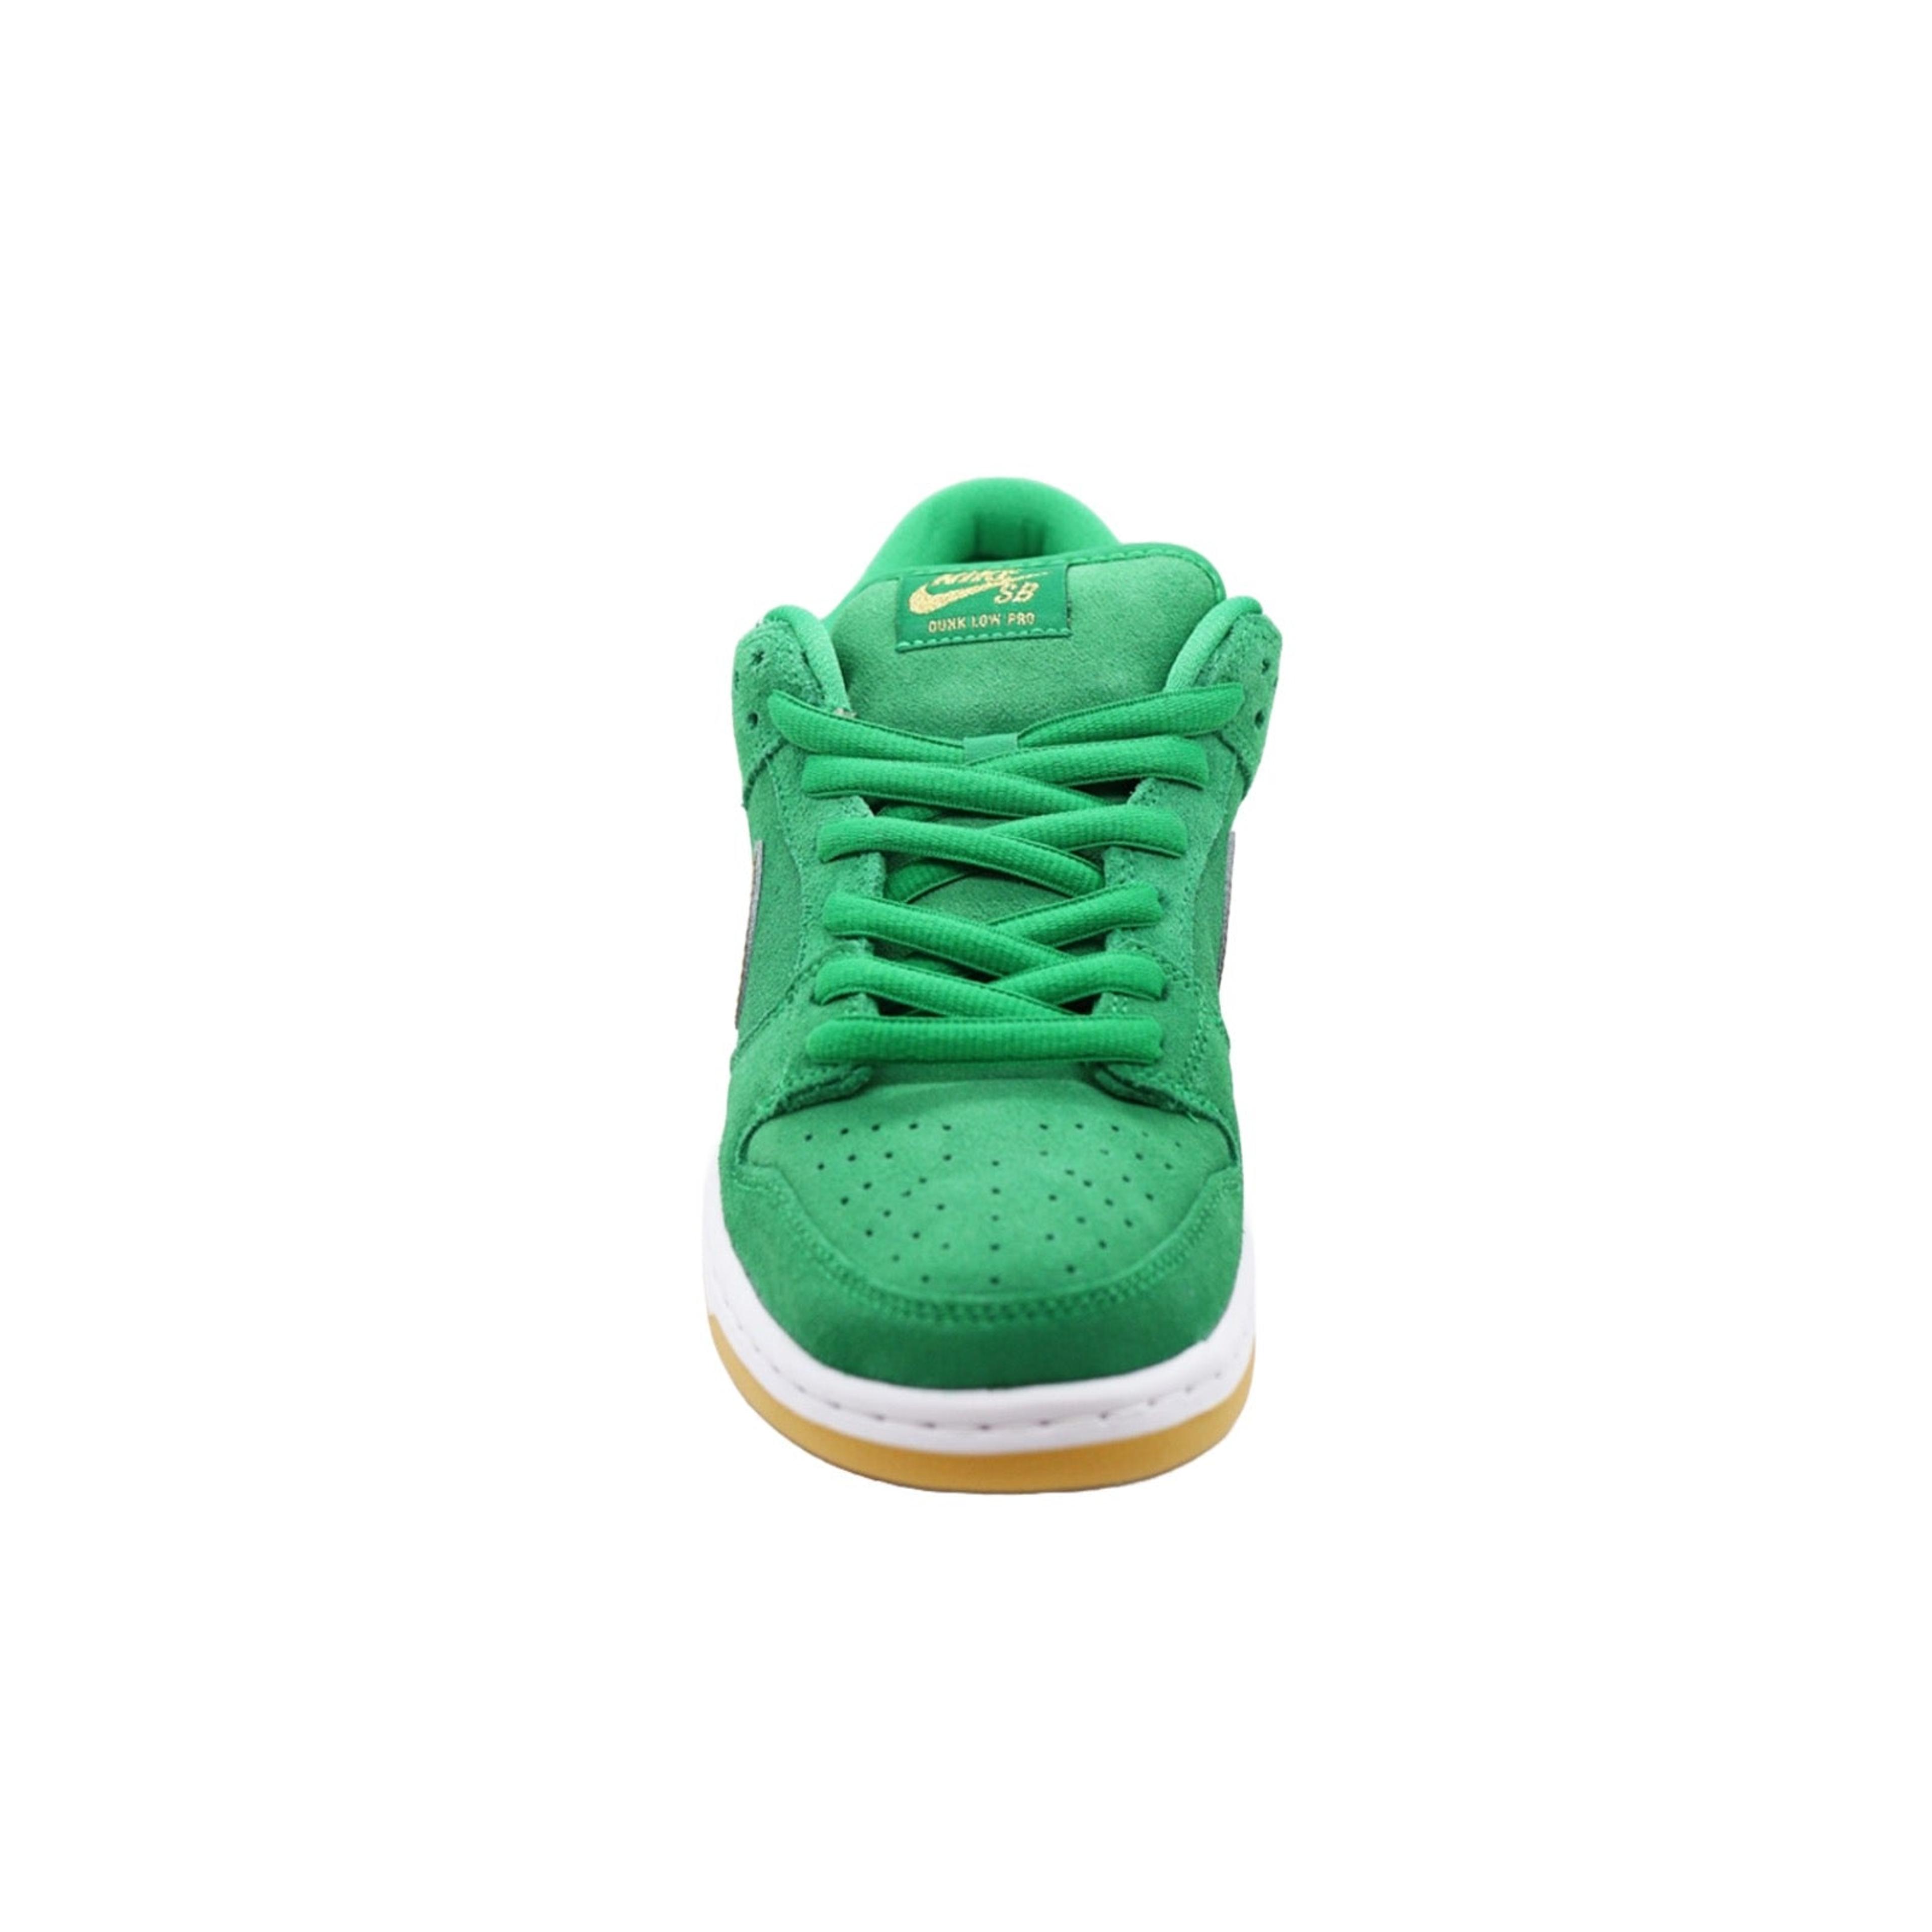 Alternate View 3 of Nike SB Dunk Low, St. Patrick's Day